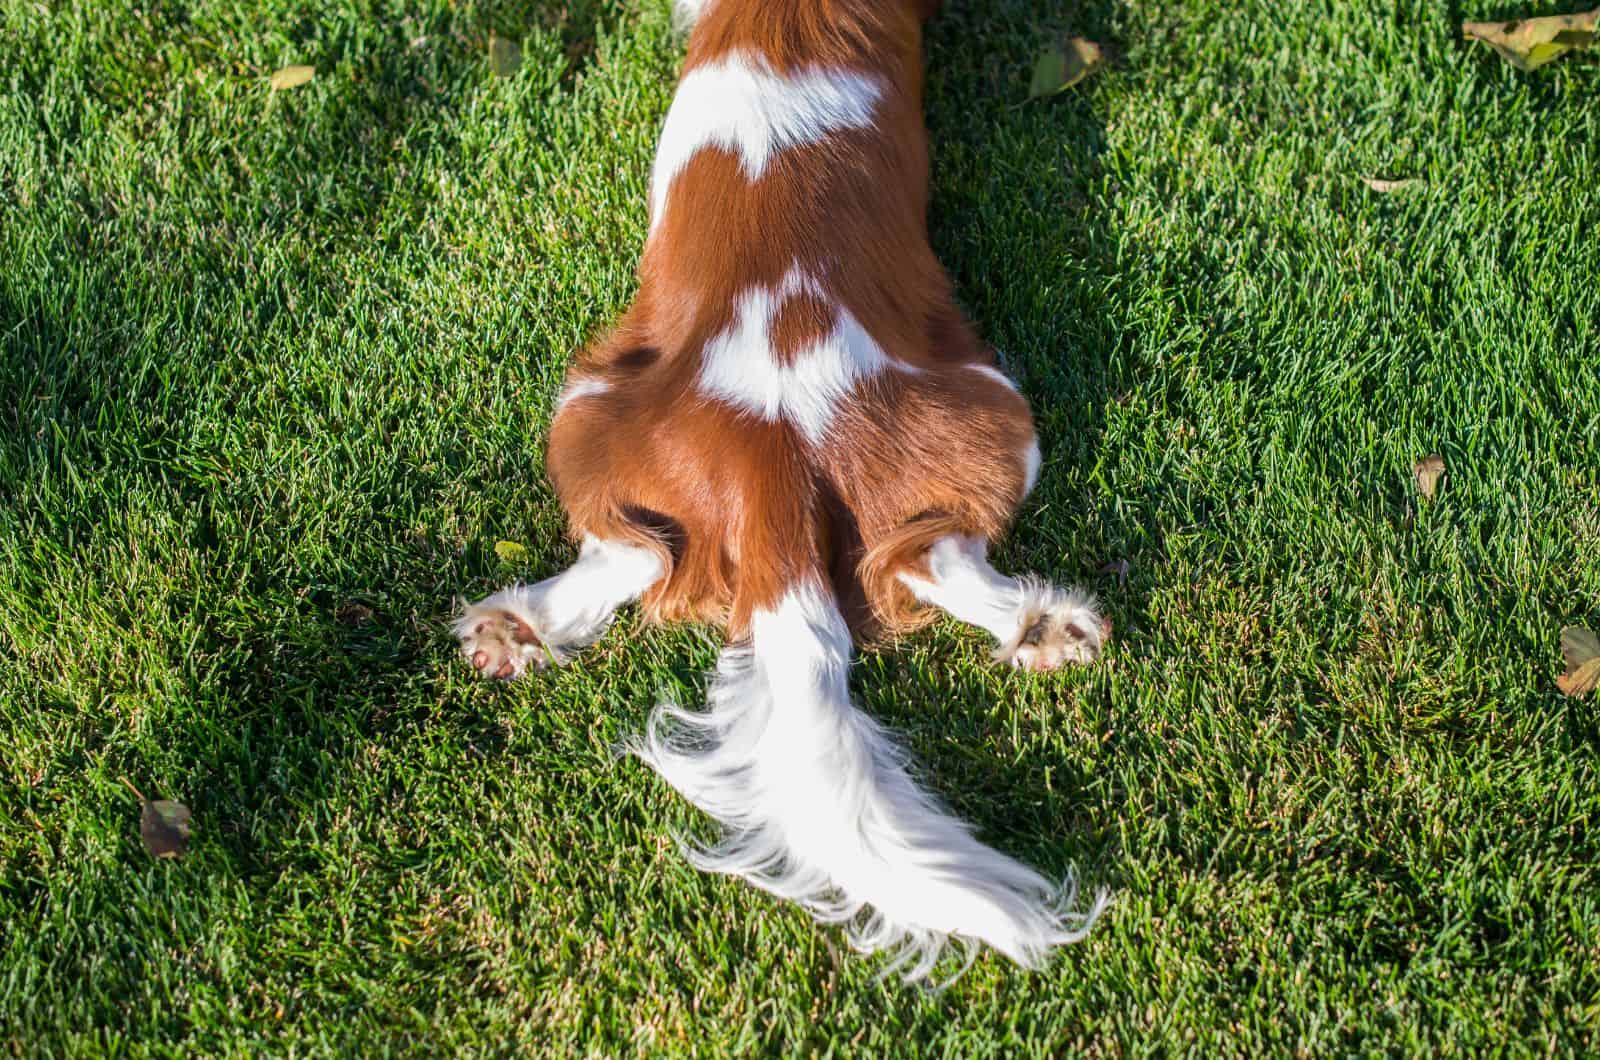 Happy Tail Syndrome: What Is It And Should You Be Concerned?